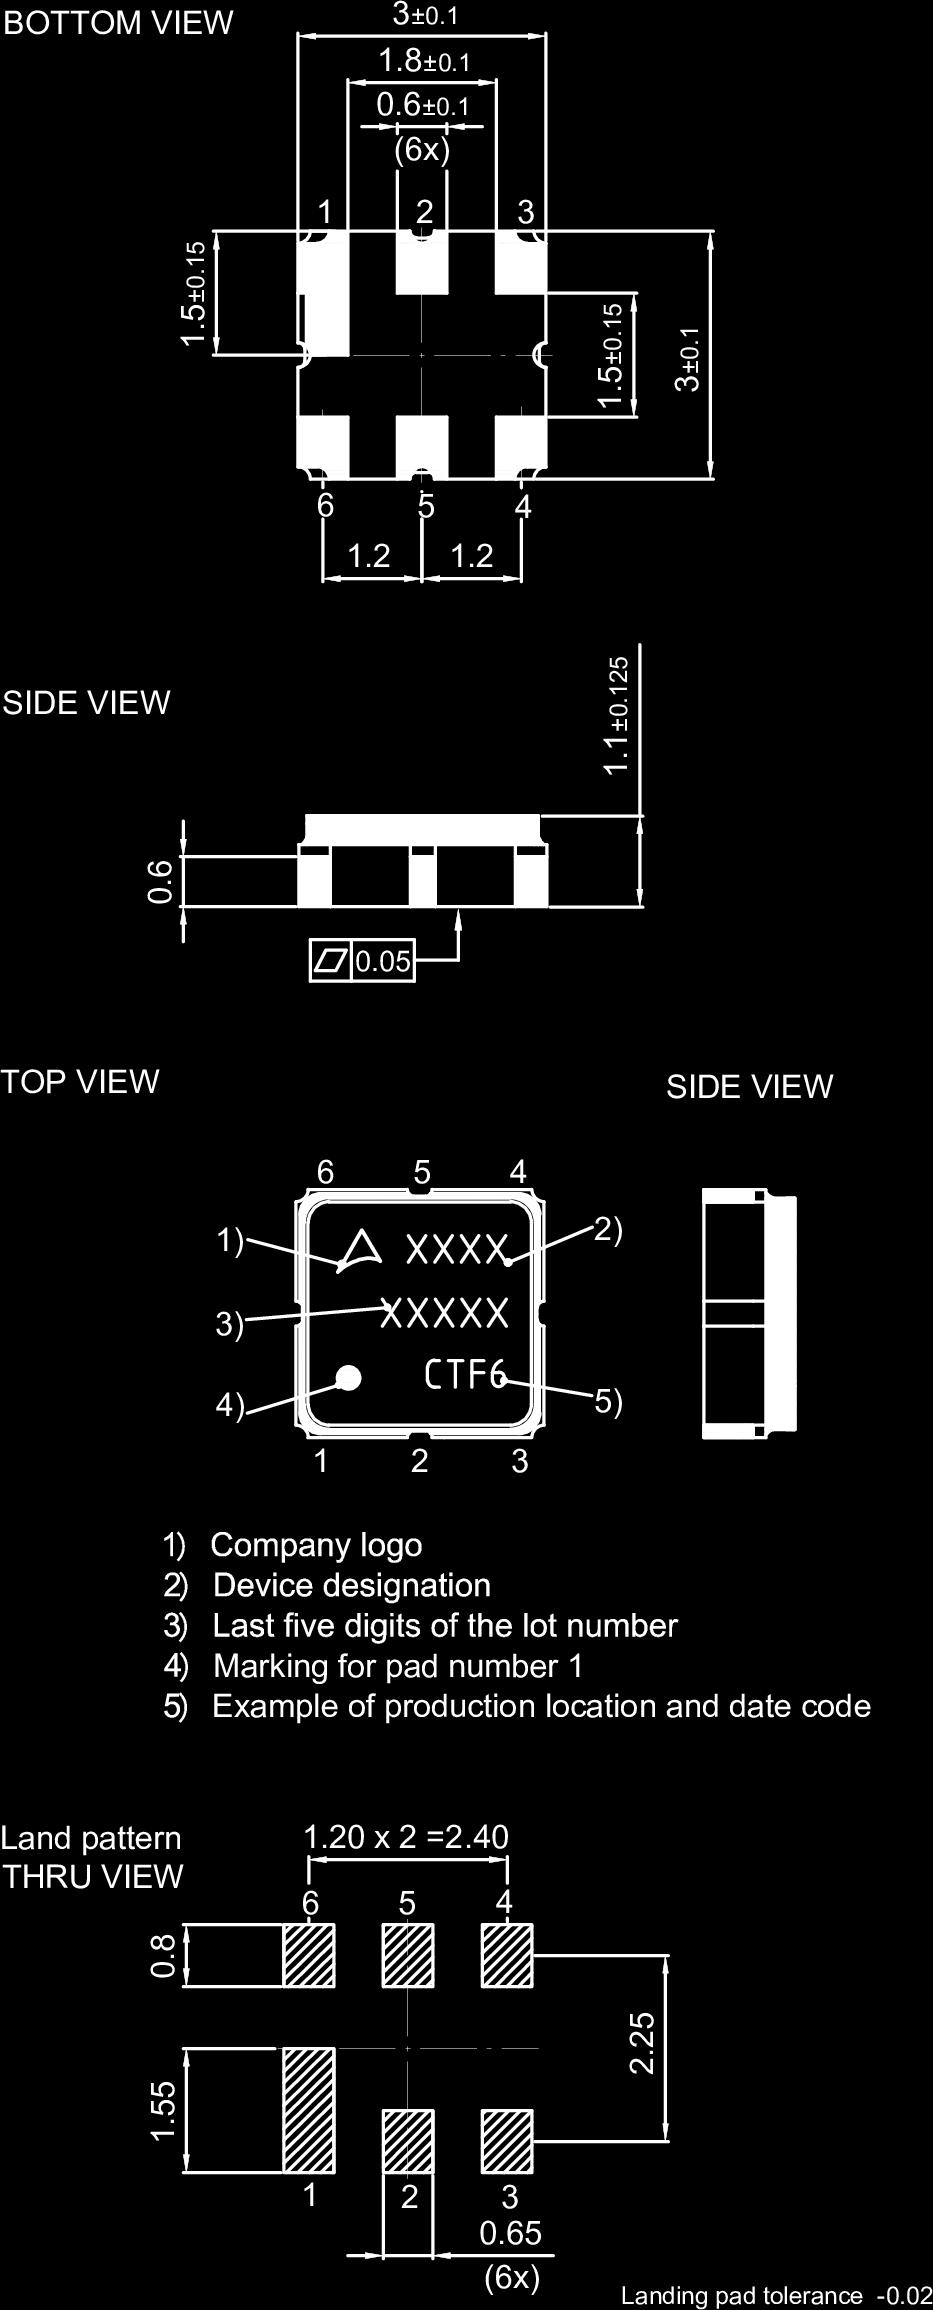 3 Package 4 Pin configuration 2 5 1, 3, 4, 6 Input Output Ground Figure 2: Drawing of package.